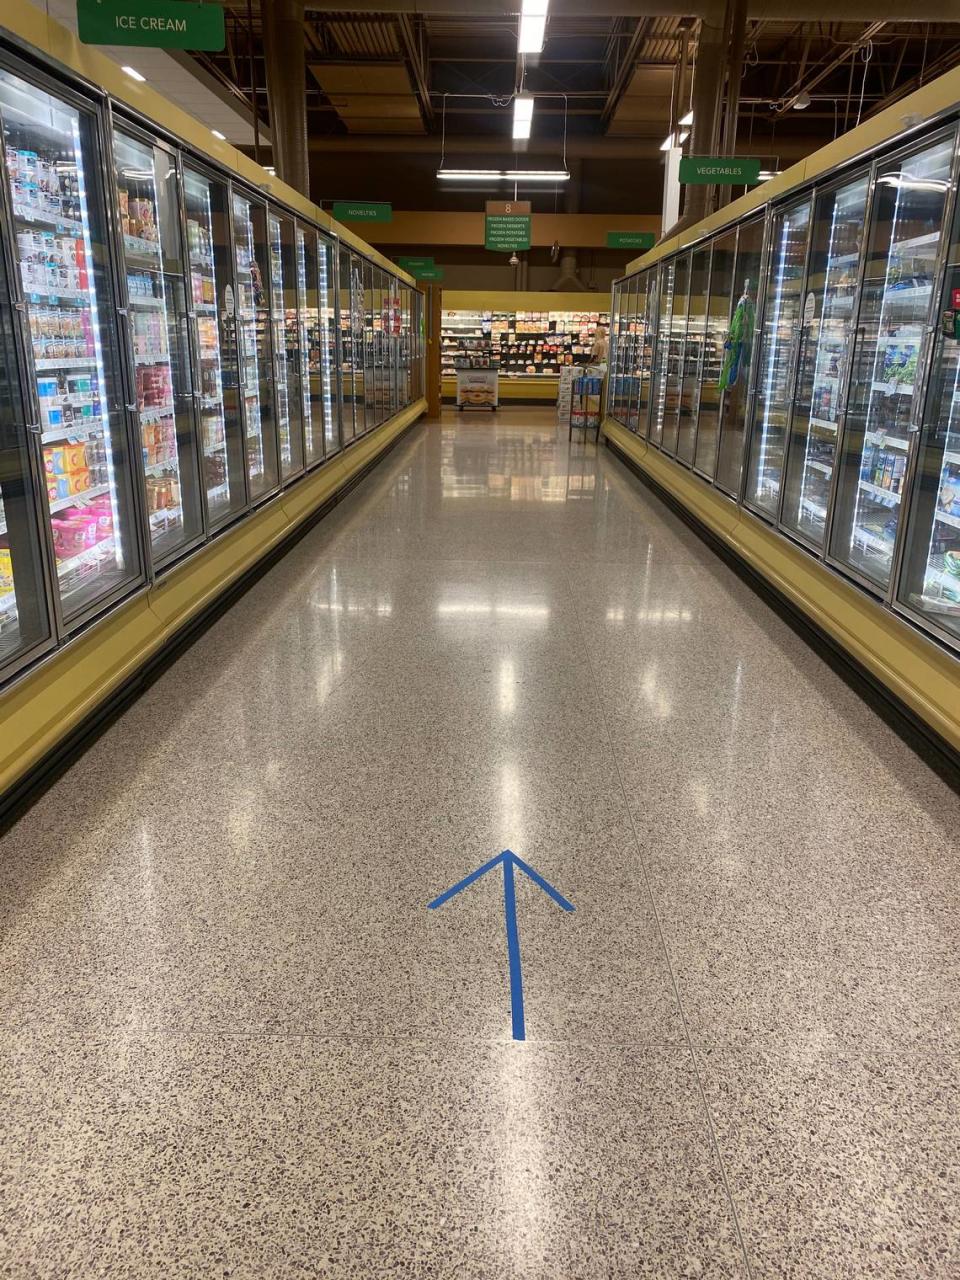 Because of the chance to spread the coronavirus, warning signs addressing social distancing hang in the aisles and directional signs on the floors ask customers to all go the same direction in Publix grocery stores around Charlotte on Wednesday, April 8, 2020.